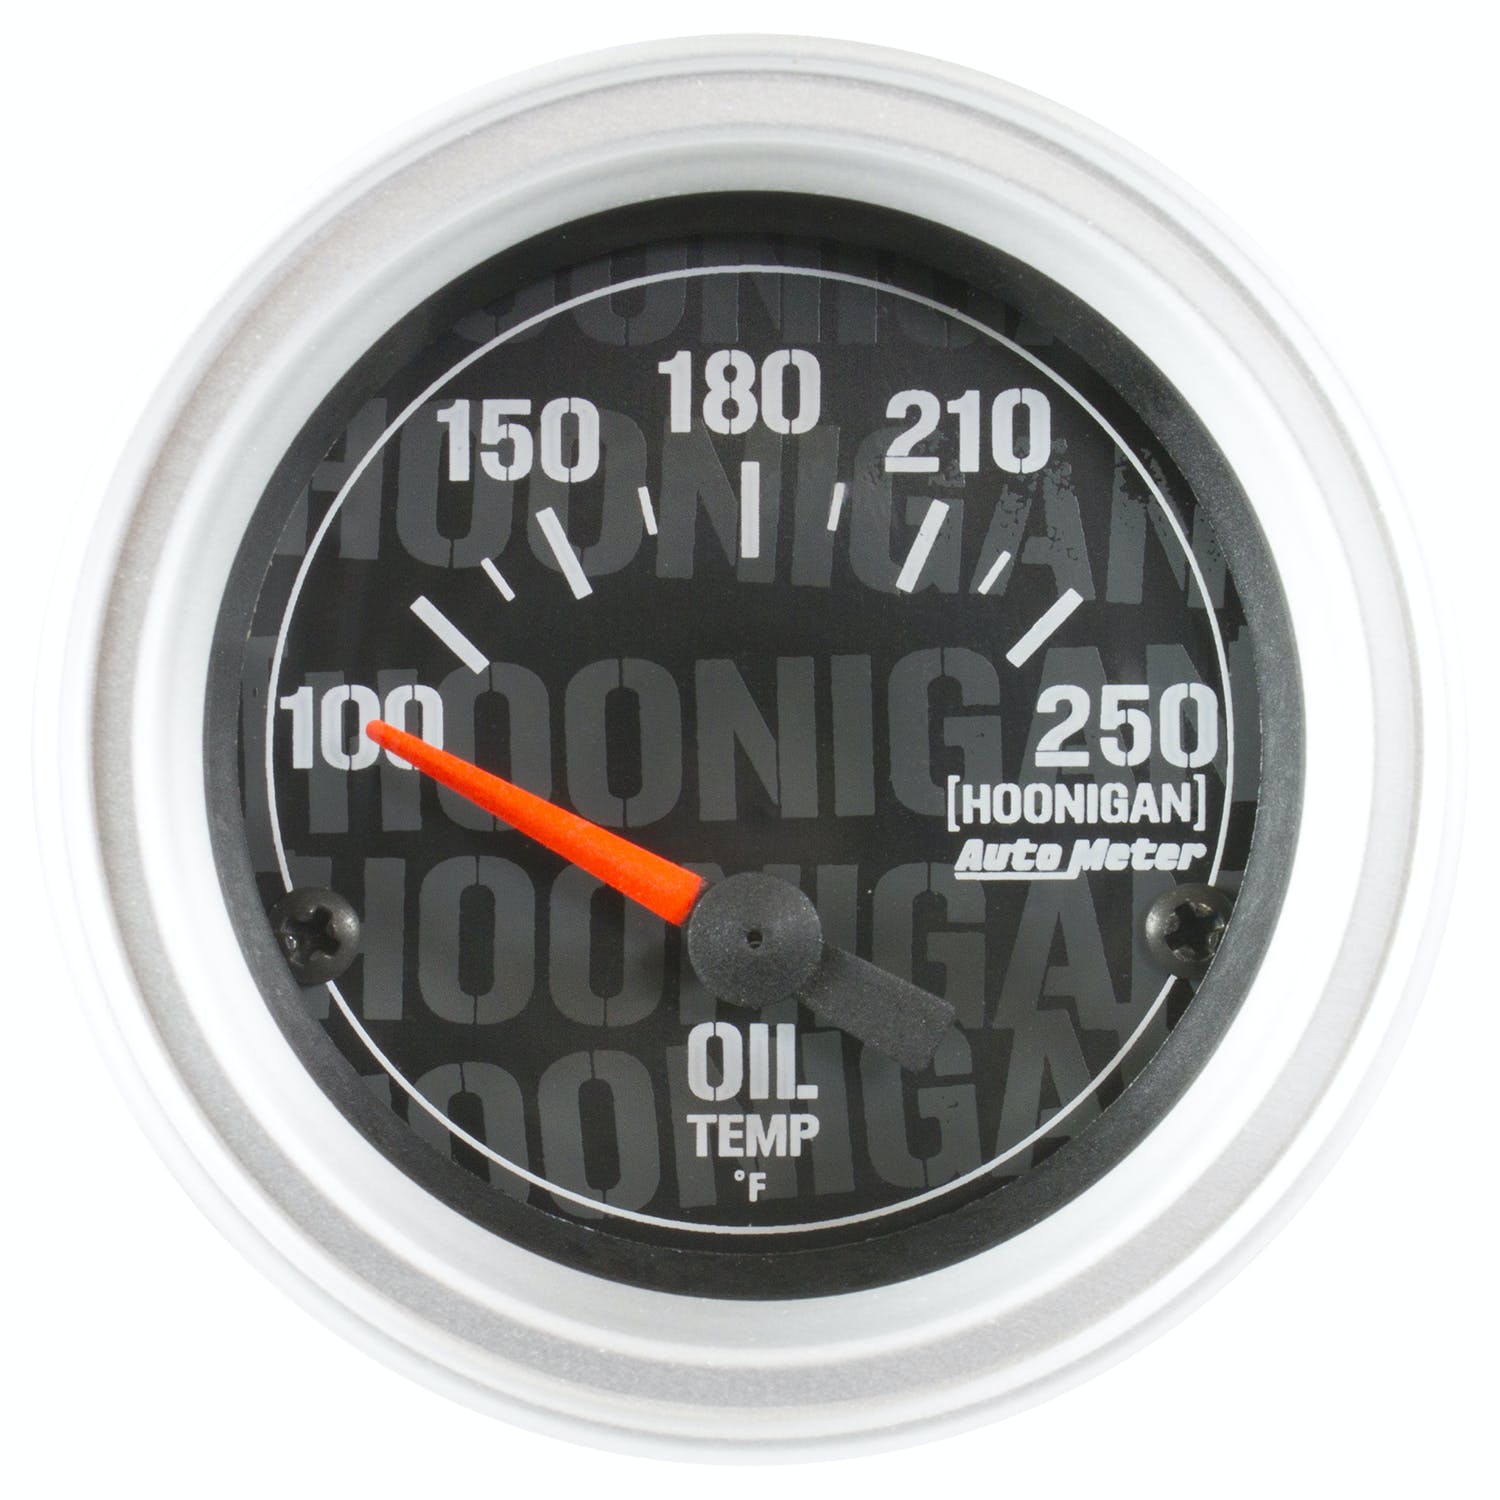 AutoMeter Products 4347-09000 Oil Temperature Gauge 2 1/16" 100-250° F Electric Hoonigan